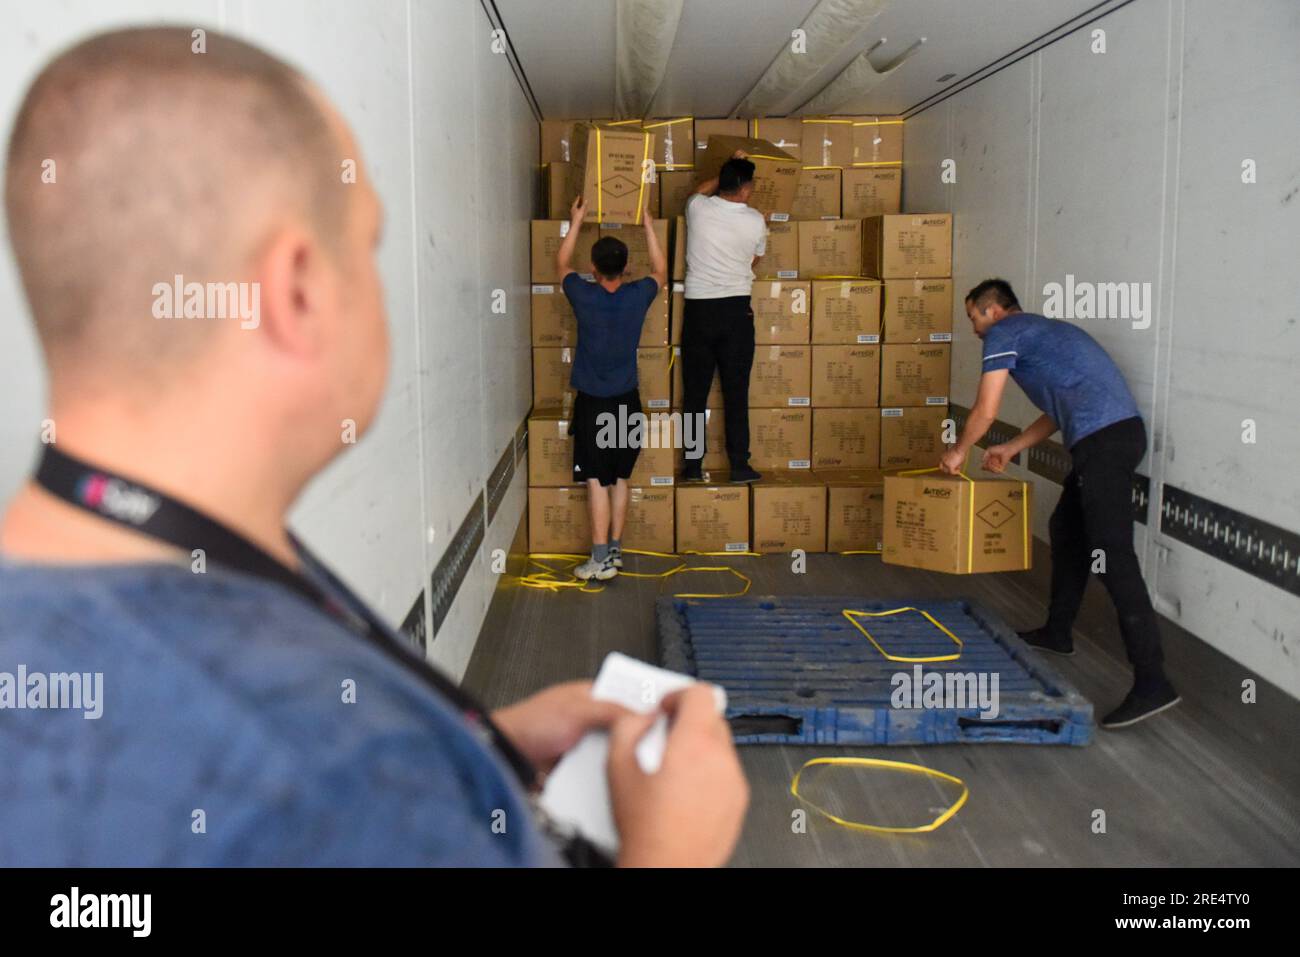 (230725) -- ALATAW PASS, July 25, 2023 (Xinhua) -- Staff members load cargo onto a truck at the custom clearance center for the cross-border e-commerce of the Alataw Pass comprehensive bonded area in northwest China's Xinjiang Uygur Autonomous Region, July 24, 2023. In recent years, various measures have been taken to create a better business environment for cross-border e-commerce enterprises in Alataw Pass. The cross-border e-commerce business was launched in the inland port in northwest China's Xinjiang Uygur Autonomous Region in January 2020. In the first half of this year, more than 14.50 Stock Photo